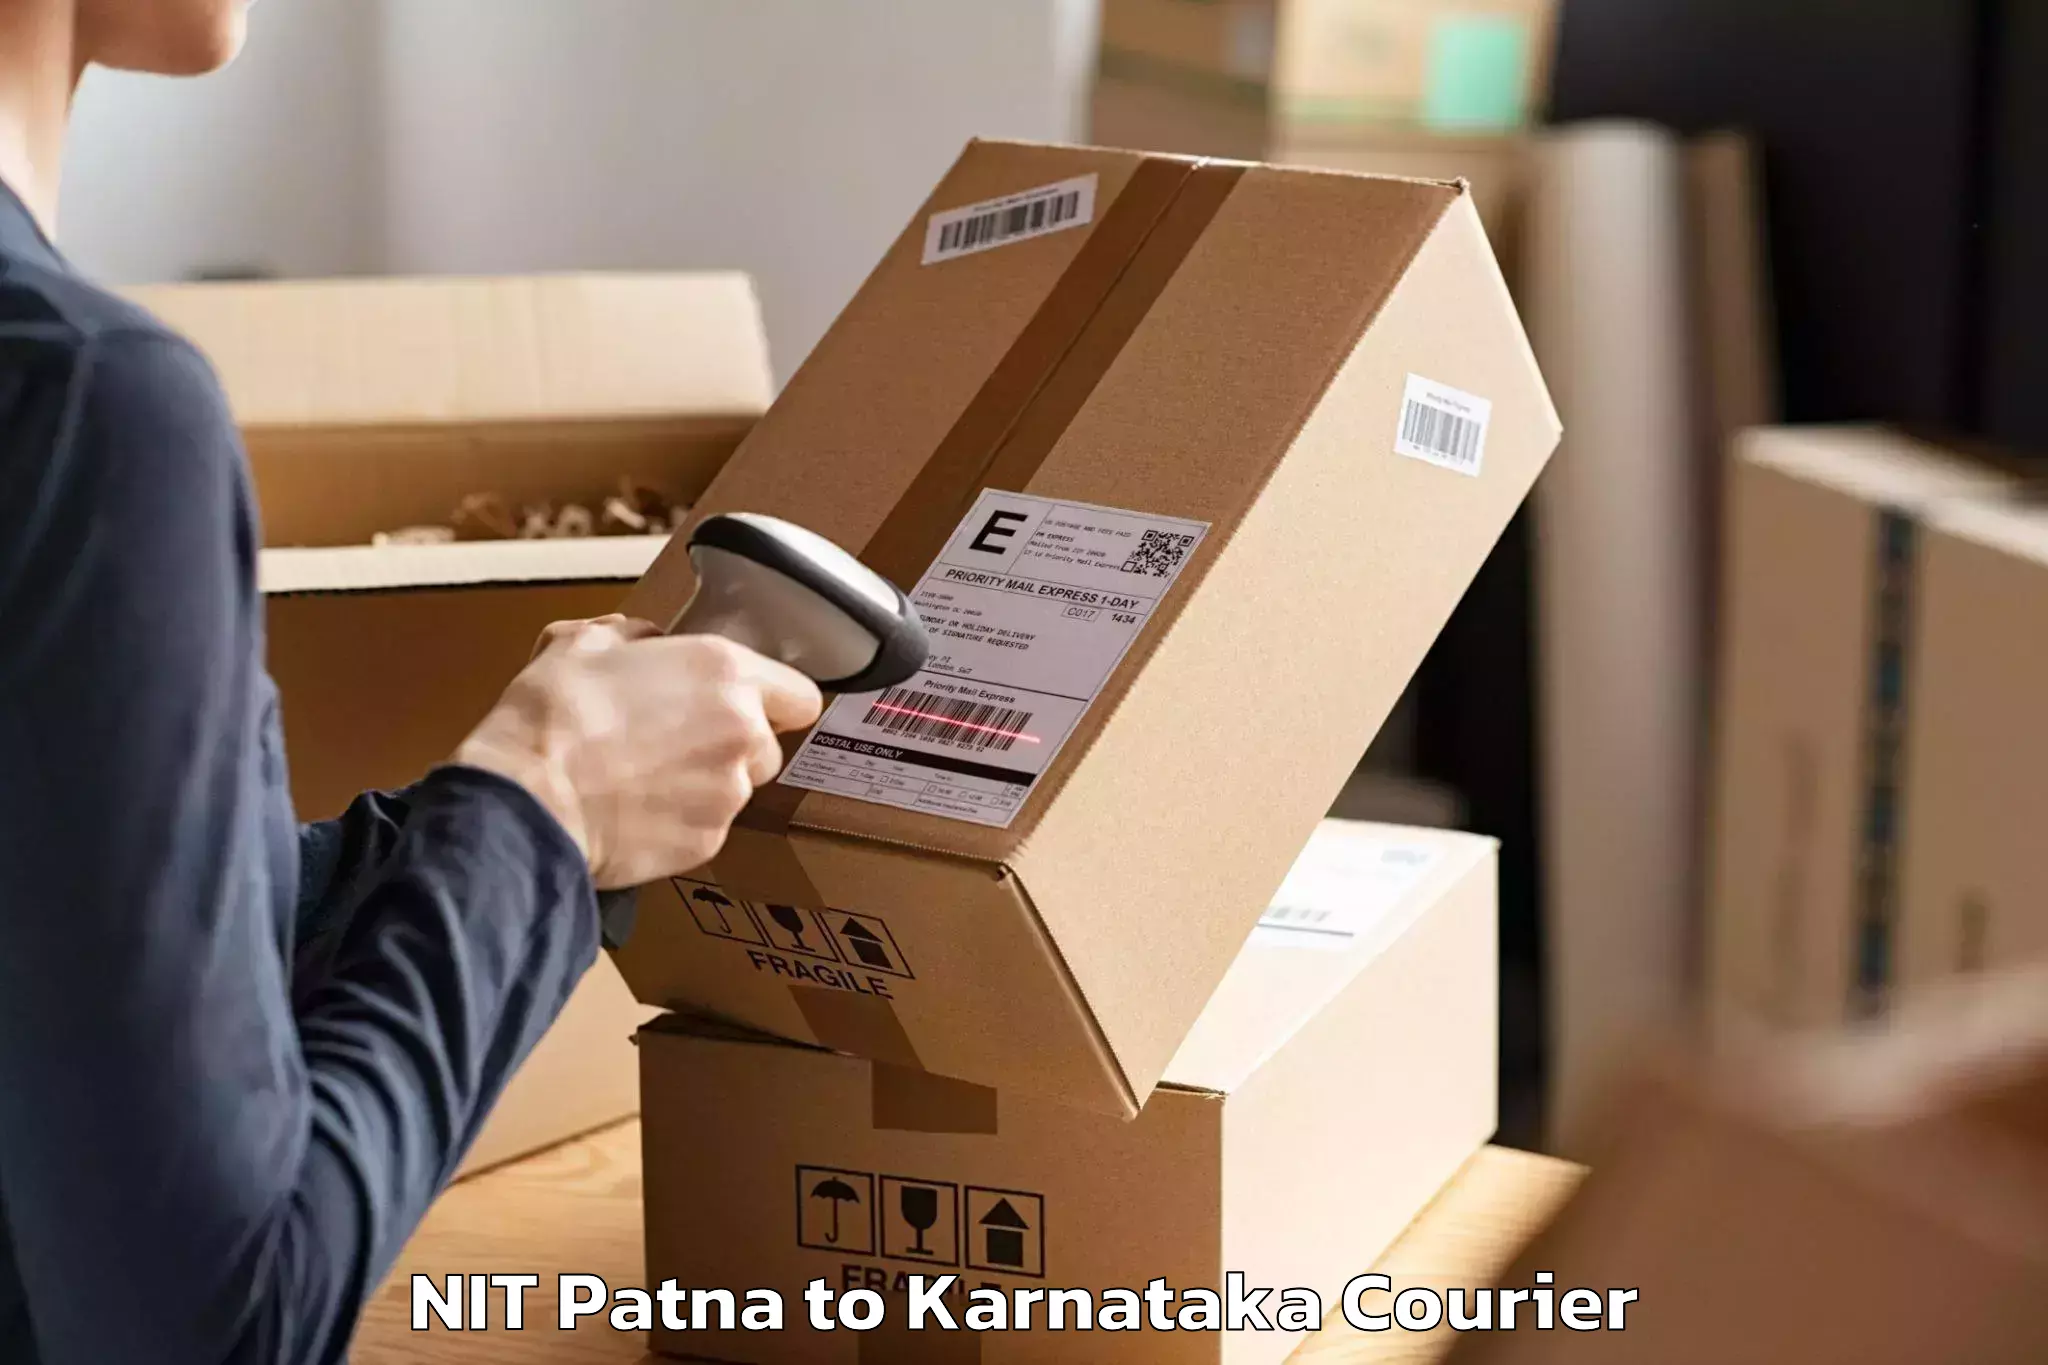 Professional movers and packers NIT Patna to Mysore University